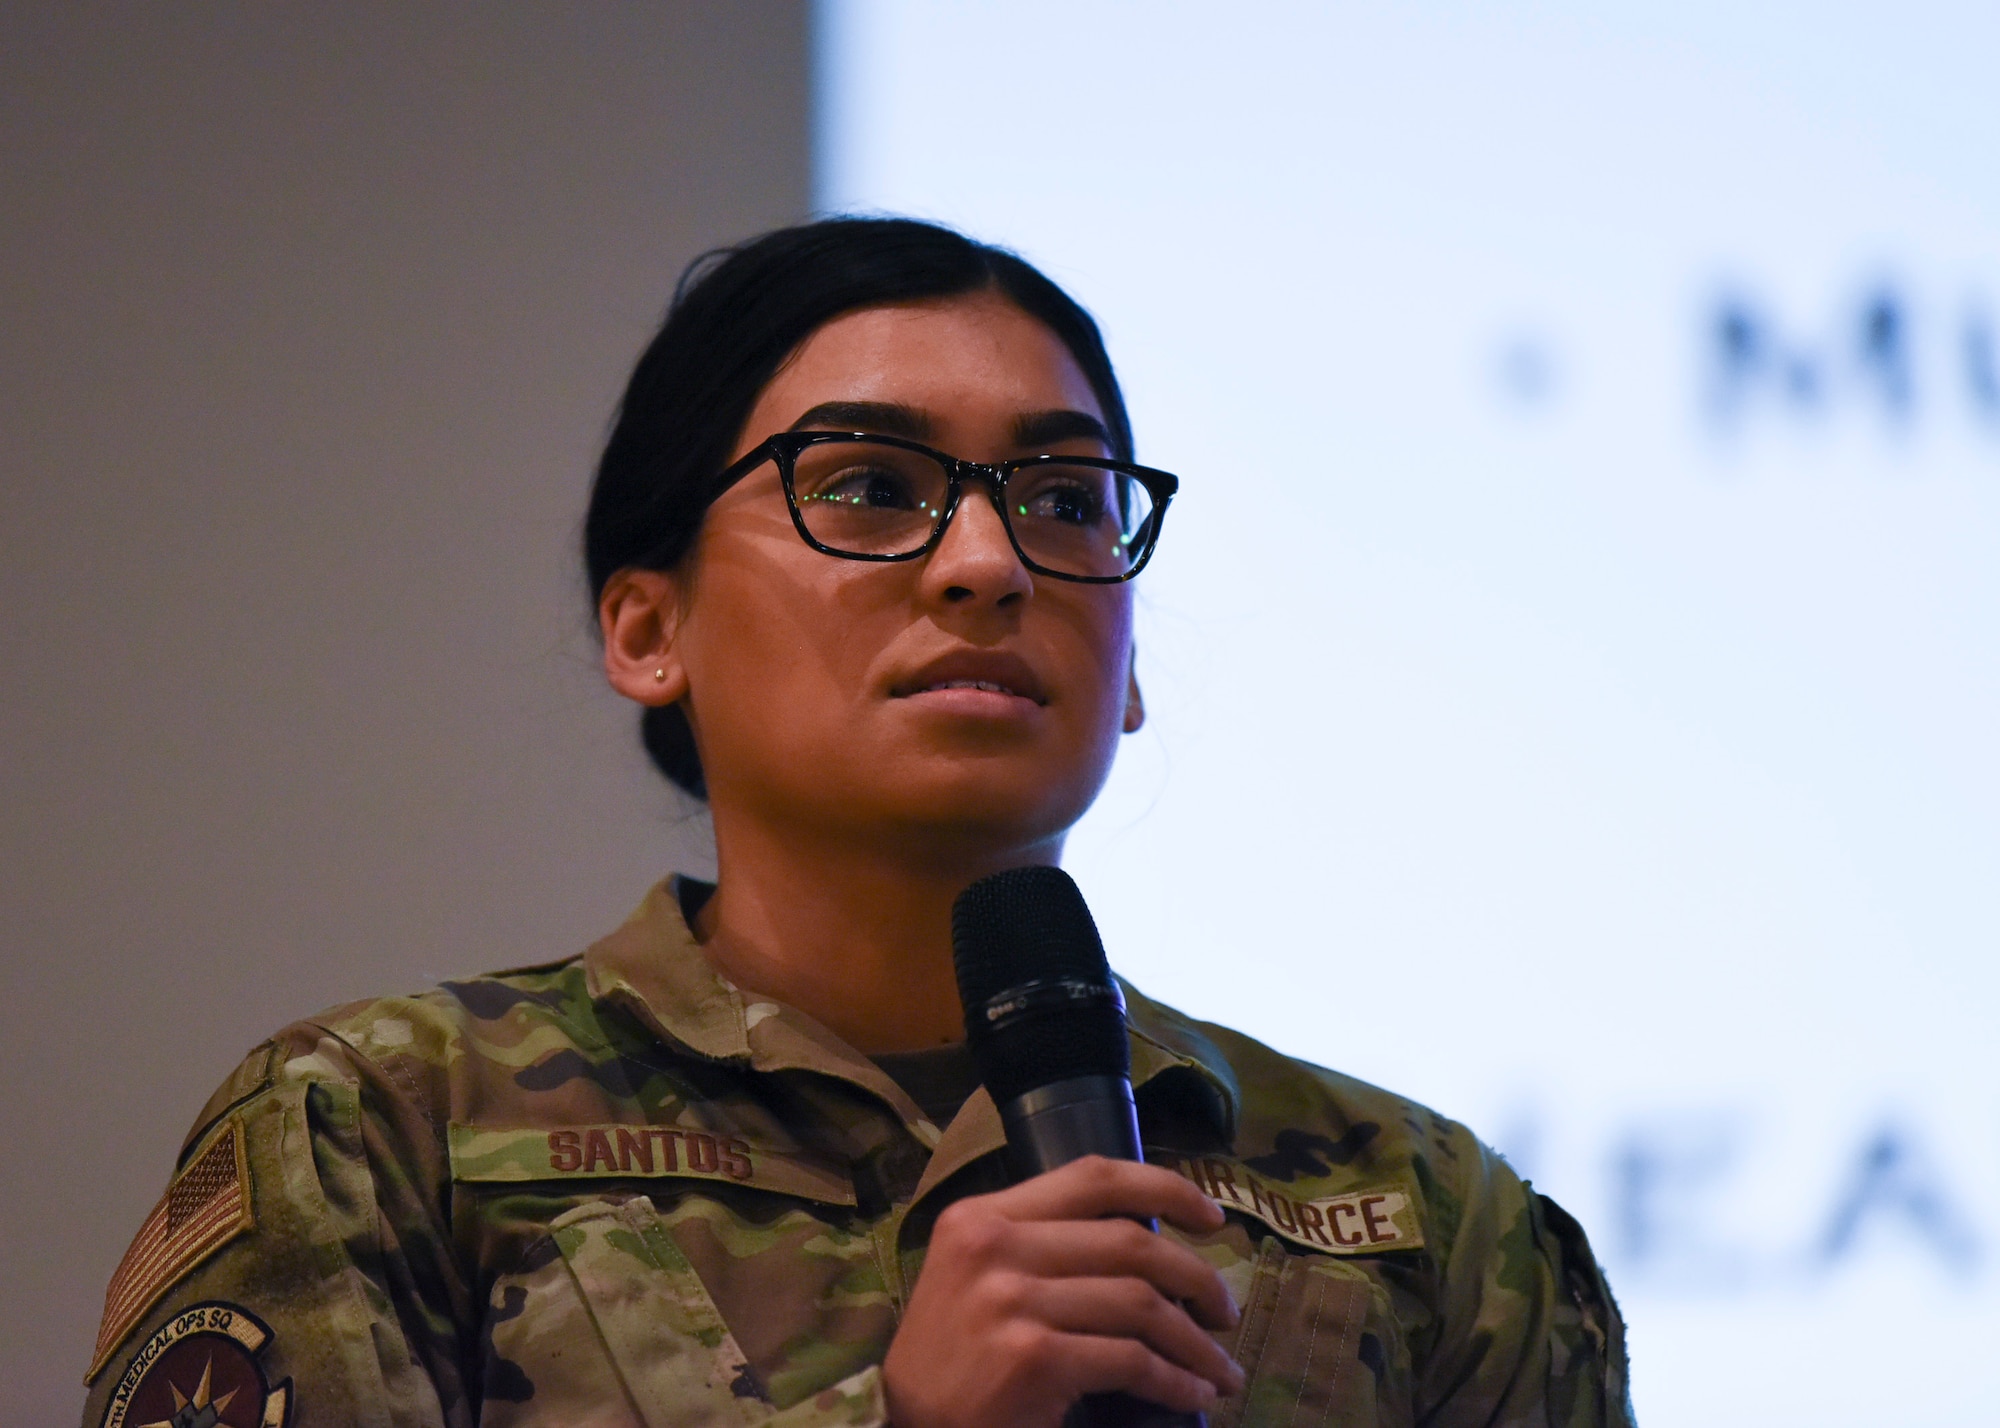 Senior Airman Alondra Santos, 8th Medical Operations Squadron personnel reliability program monitor speaks to Wolf Pack members about her personal experience attending the Air Force Association's 2019 Air, Space and Cyber Conference during a commander’s call at Kunsan Air Base, Republic of Korea, Oct. 25, 2019. Her favorite part of the conference was hearing Chief Master Sgt. of the Air Force Kaleth O. Wright speak about perseverance. (U.S. Air Force photo by Staff Sgt. Anthony Hetlage)